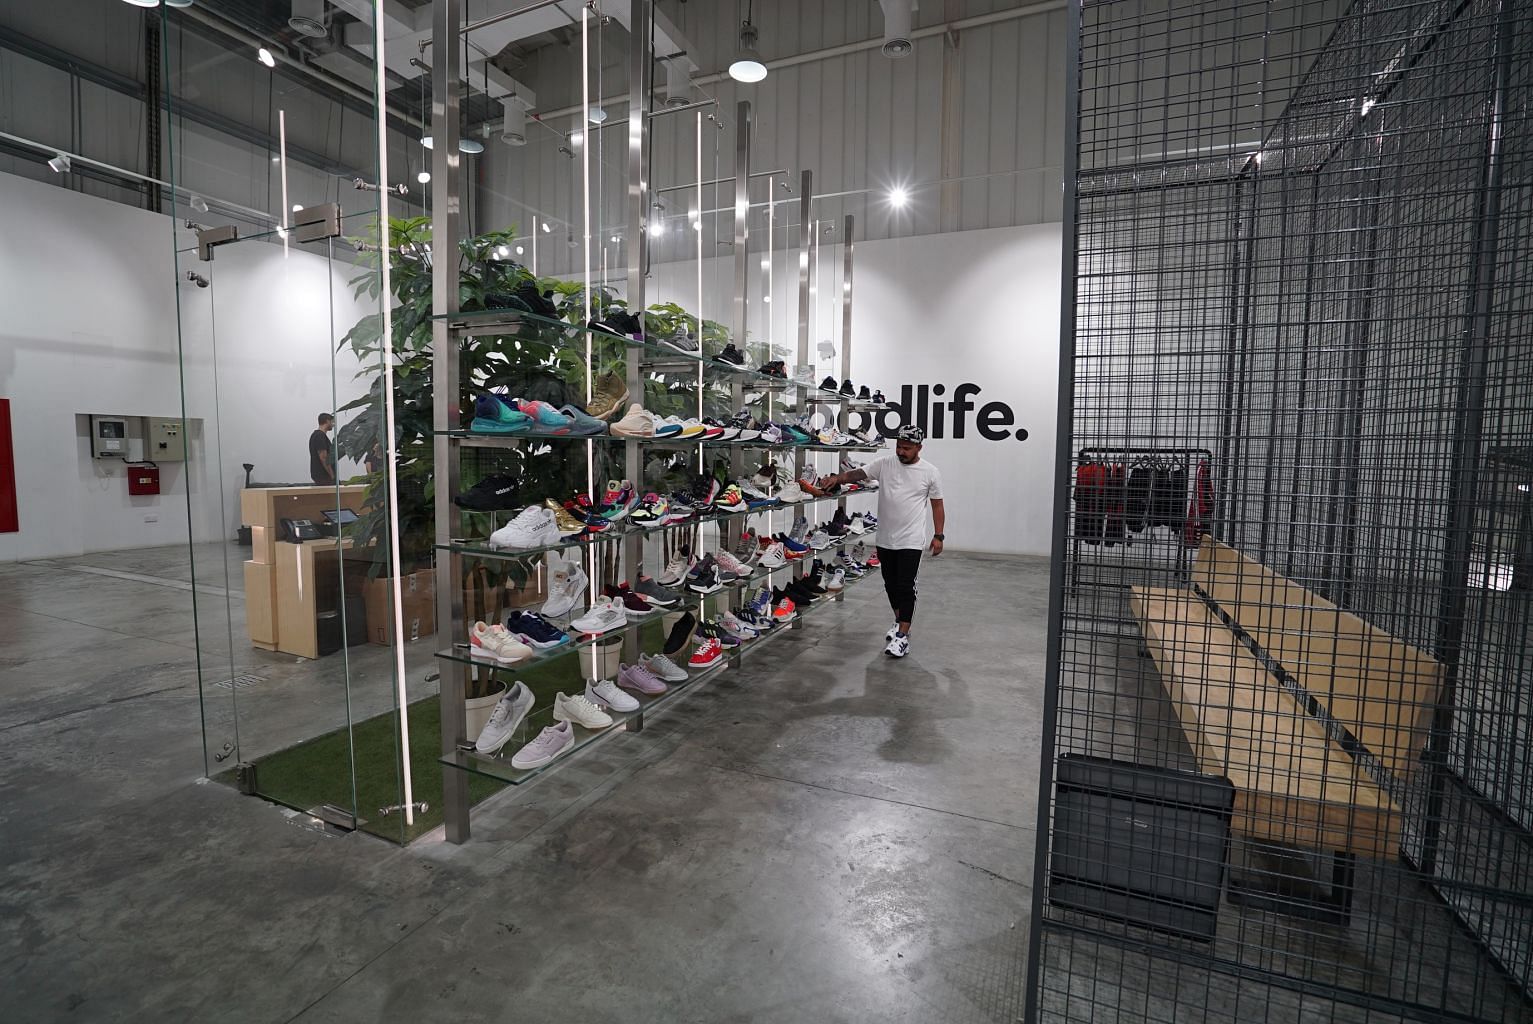 Sneaker boutique thegoodlife sells hard-to-find sneakers. It is located in Alserkal Avenue, an arts district in an industrial zone of Dubai.